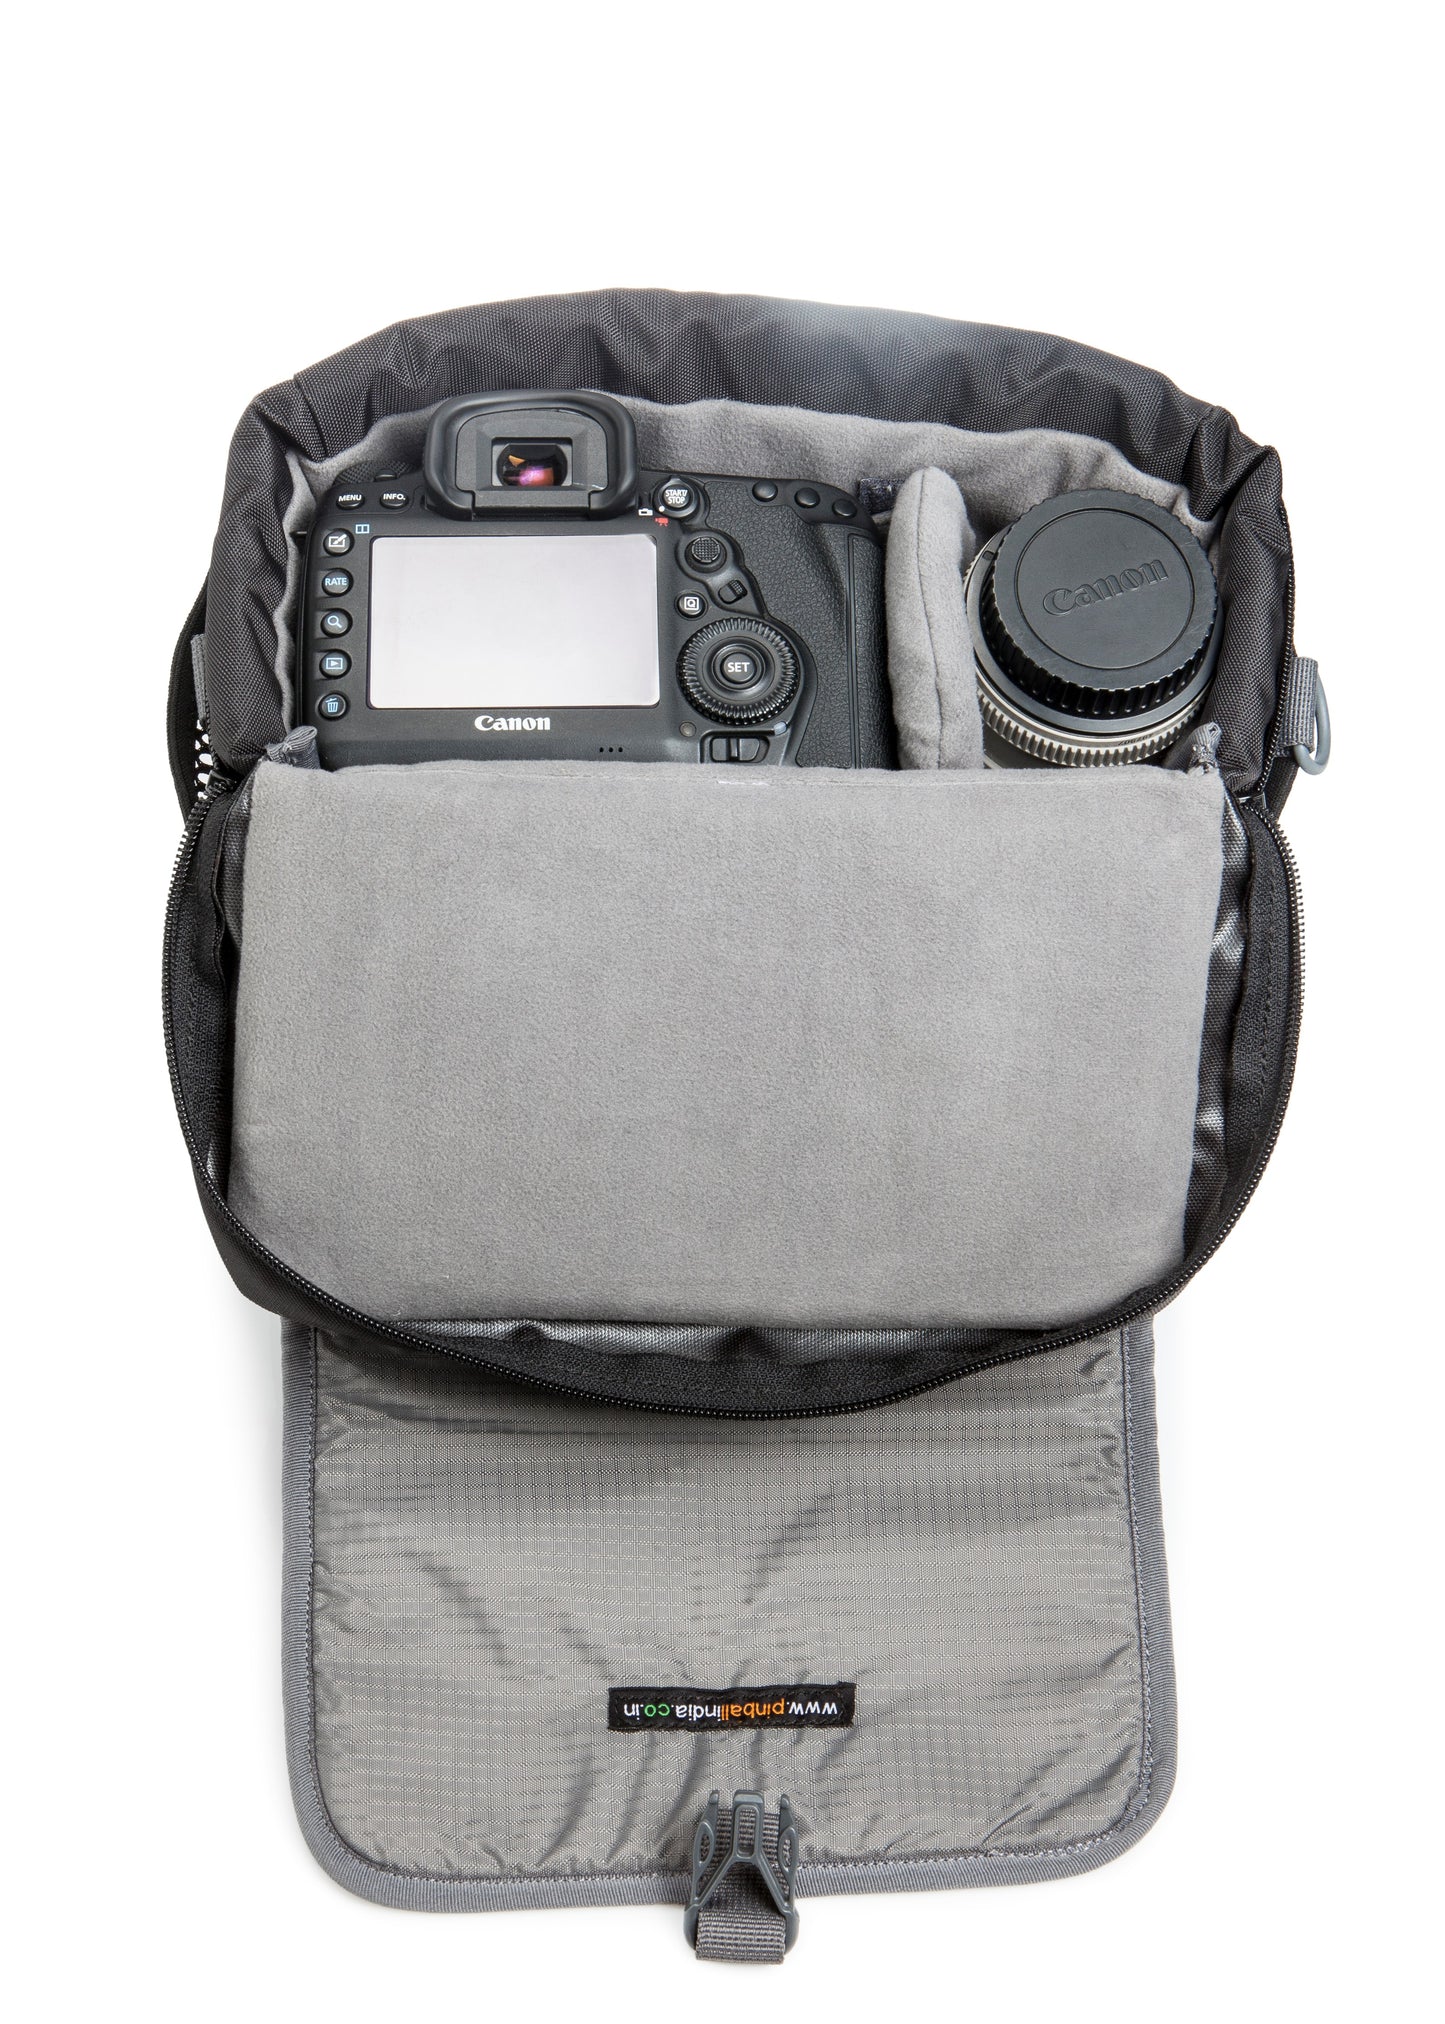 Image: Top view of the P28 PNX DSLR camera bag, showcasing its open configuration with a camera and equipment neatly organized inside. The compact bag provides versatile storage for a camera, lens, and additional accessories, ensuring easy access and efficient organization during photography sessions.